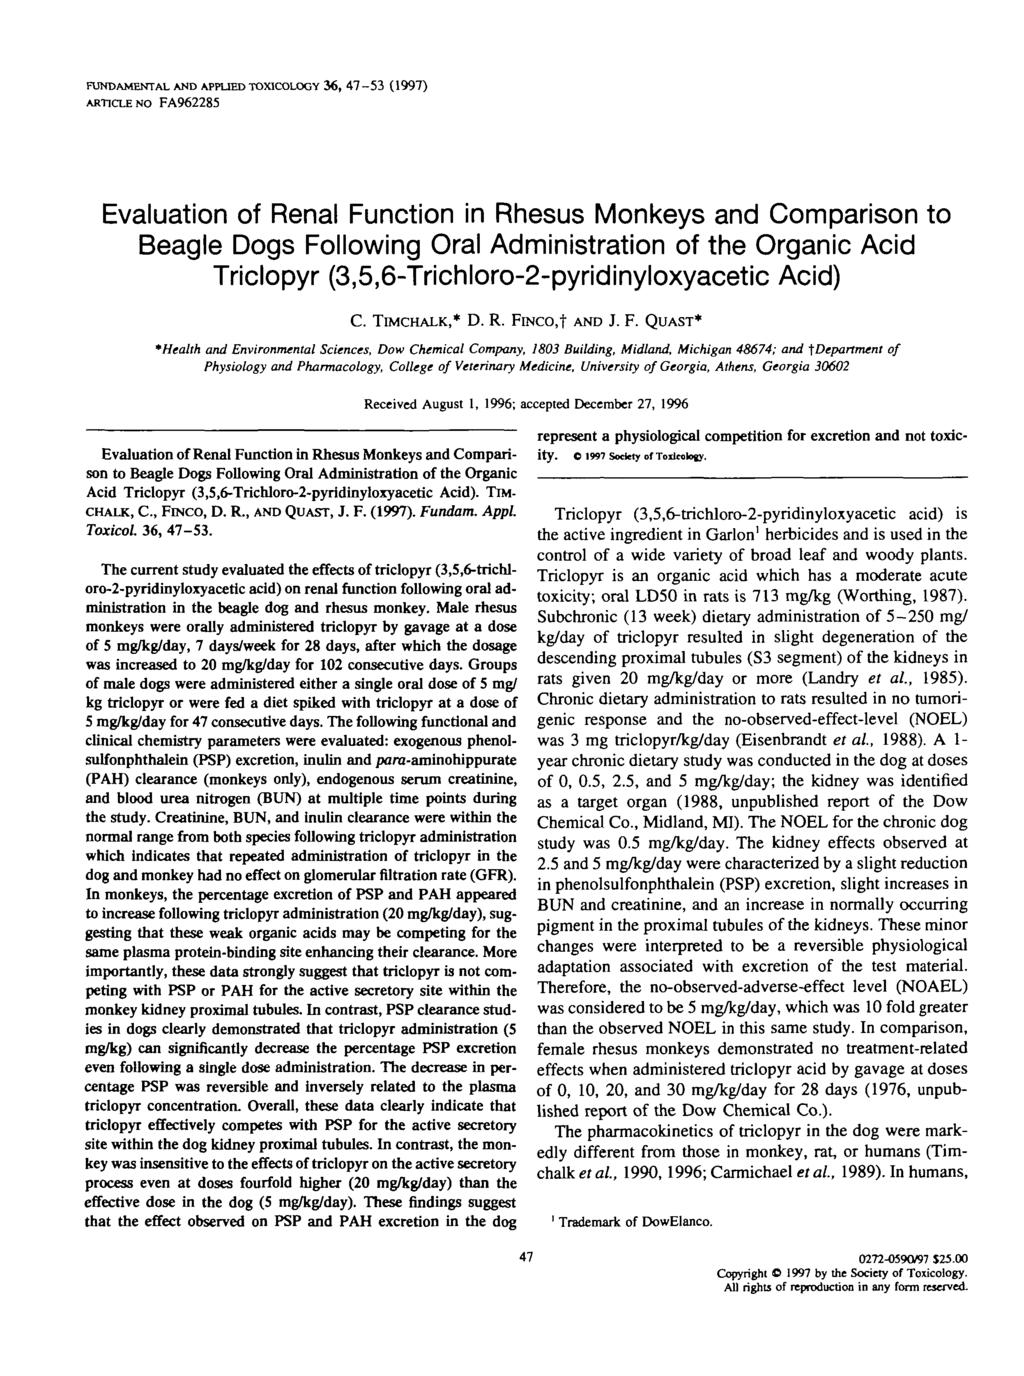 FUNDAMENTAL AND APPLIED TOXICOLOGY 36, 47-53 (997) ARTICLE NO FA962285 Evalation of Renal Fnction in Rhess Monkeys and Comparison to Beagle Dogs Following Oral Administration of the Organic Acid